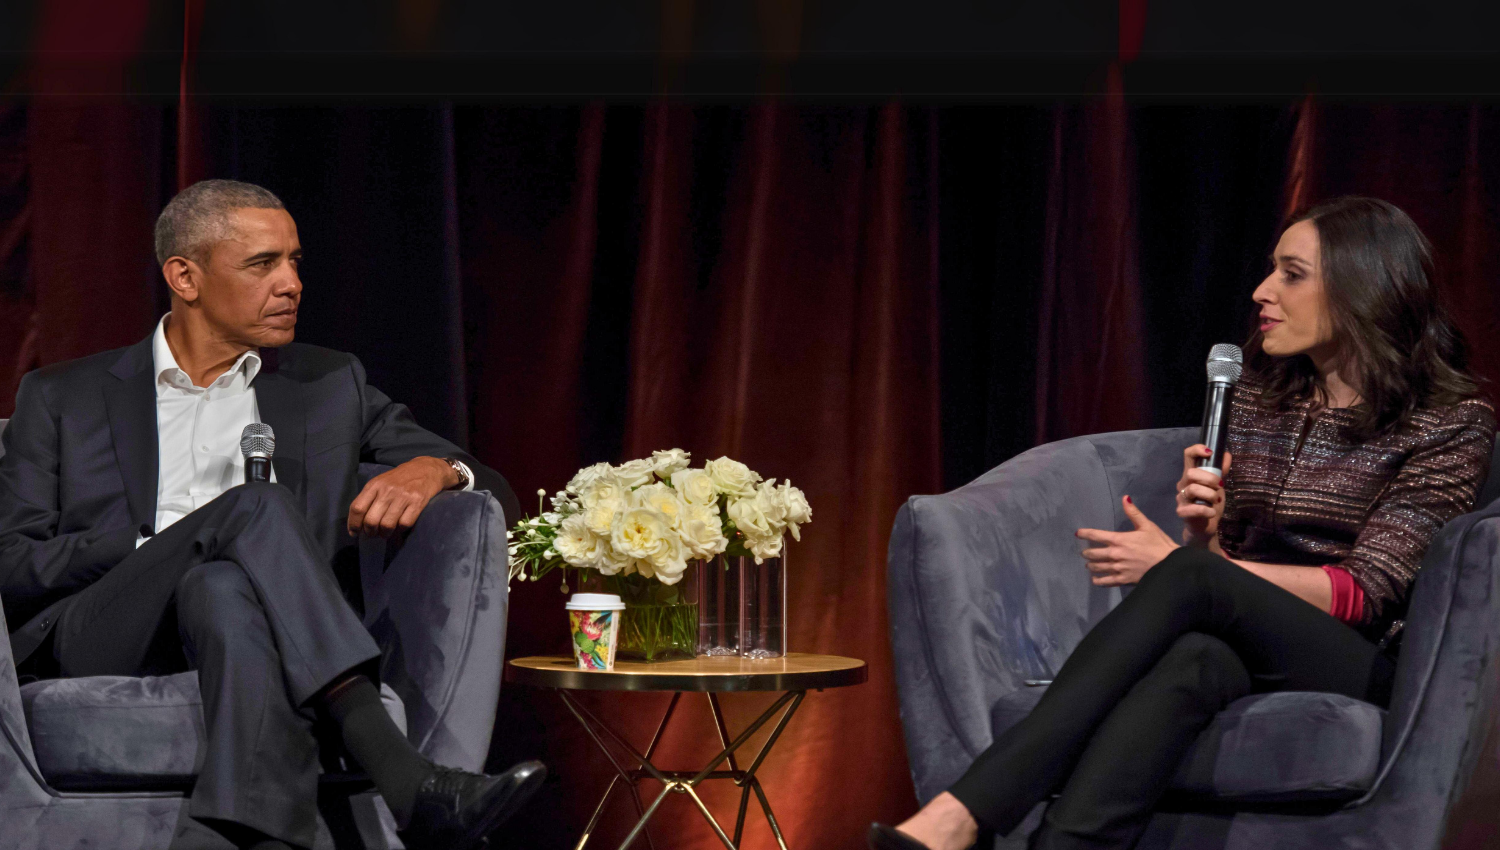 Holly Ransom interviewing Barack Obama on stage